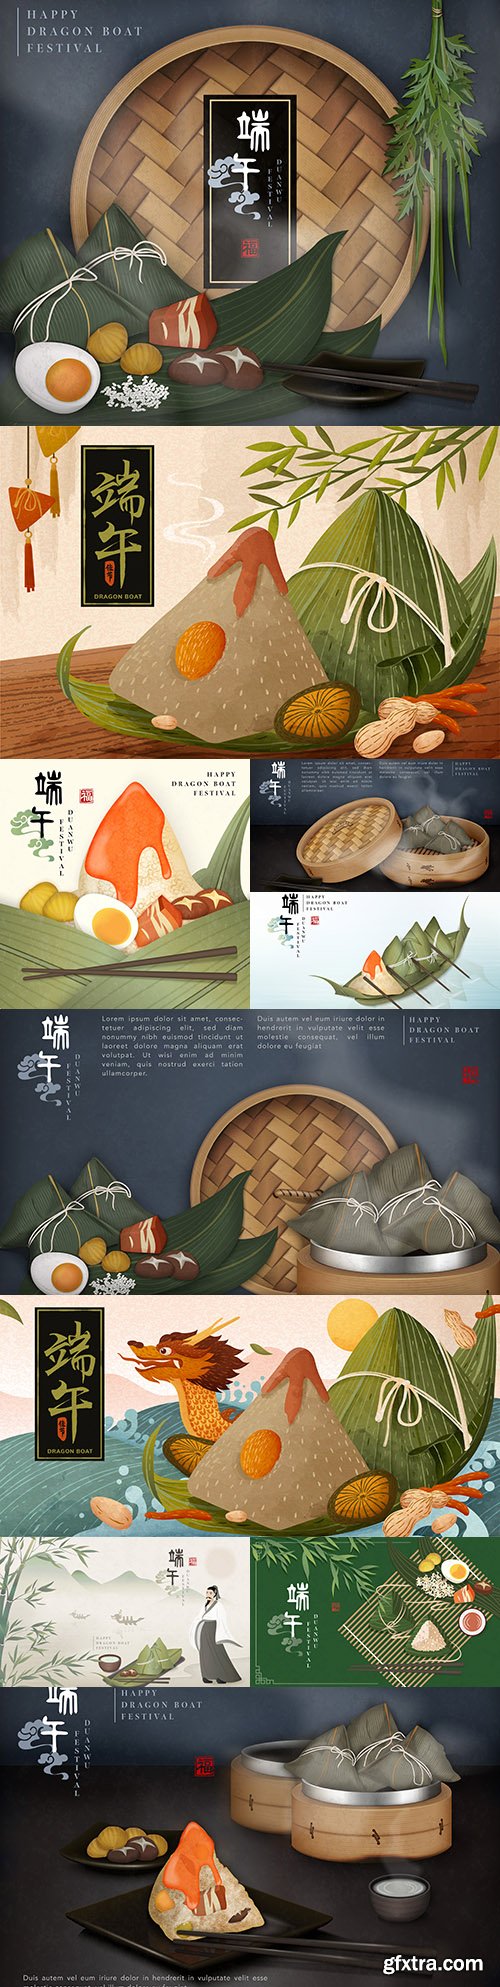 Happy dragon boat festival template with traditional food 
